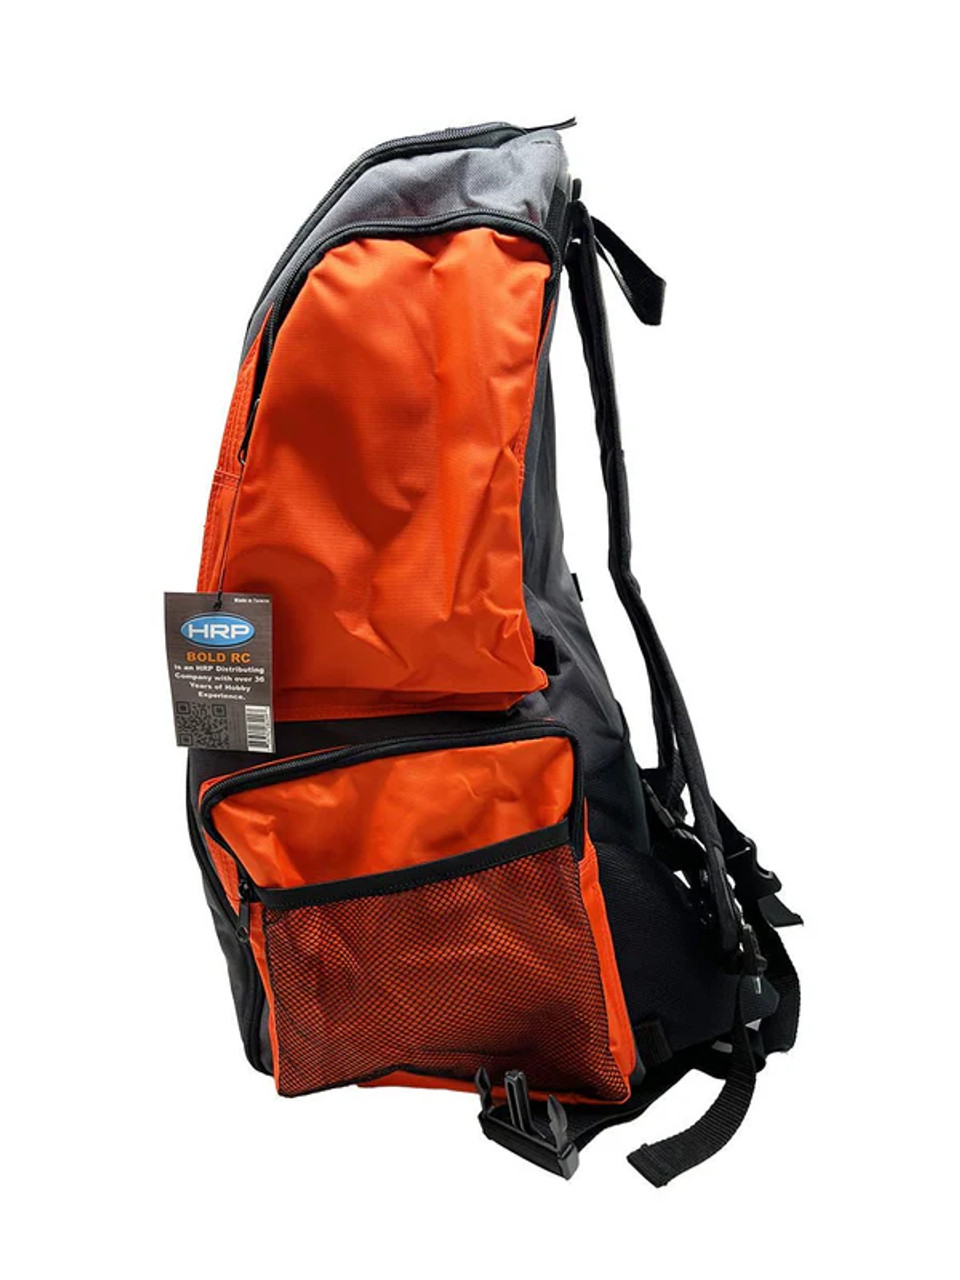 Bold RC Adventure Trail Backpack